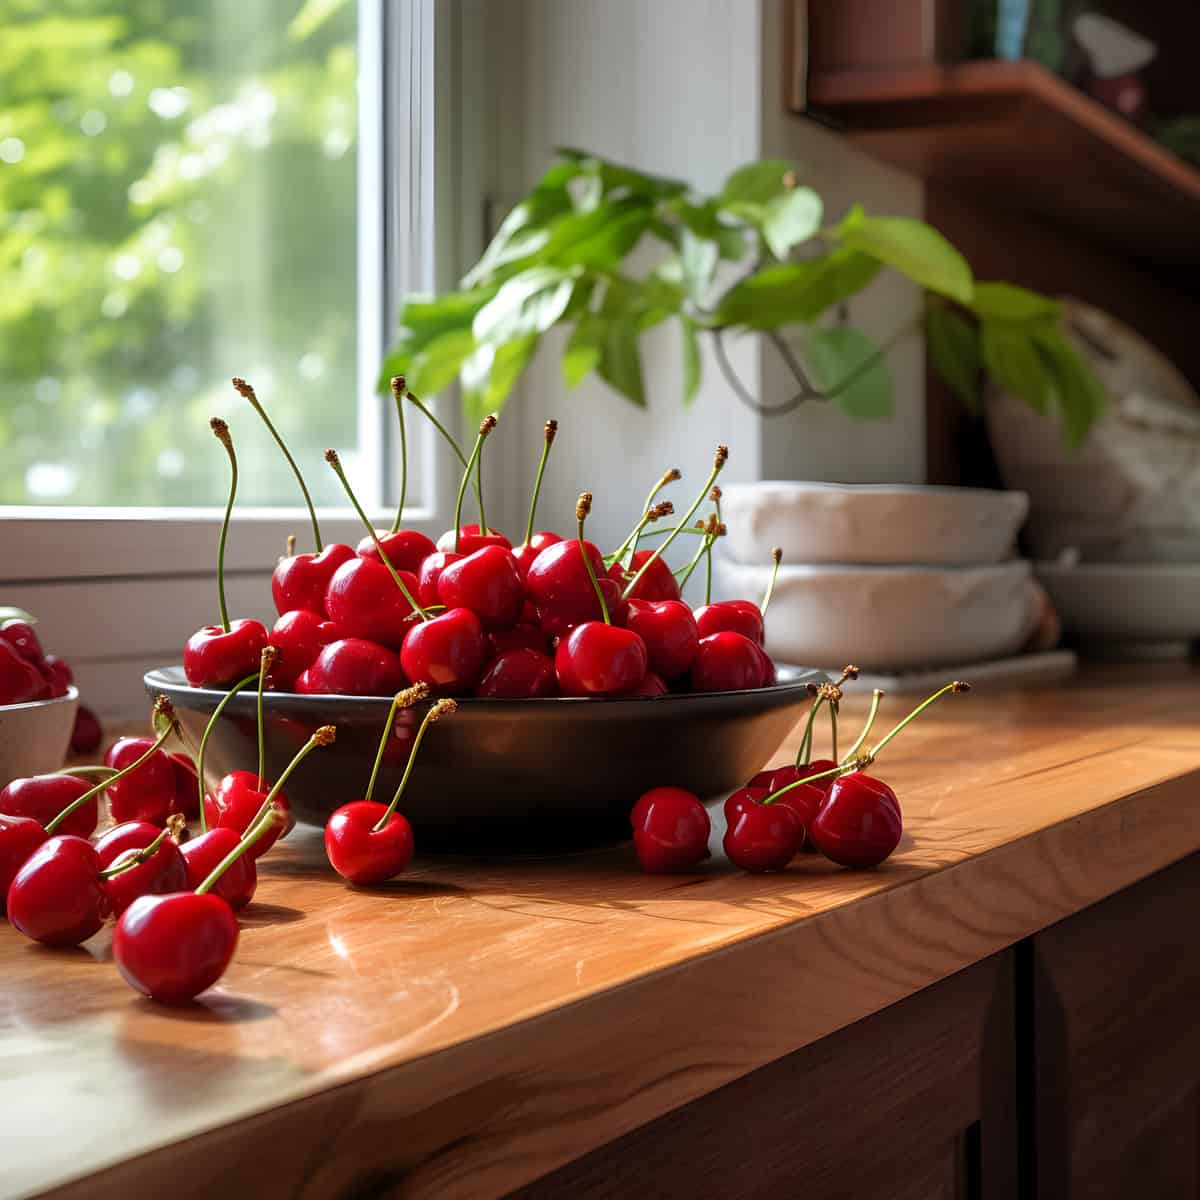 Sargents Cherries on a kitchen counter